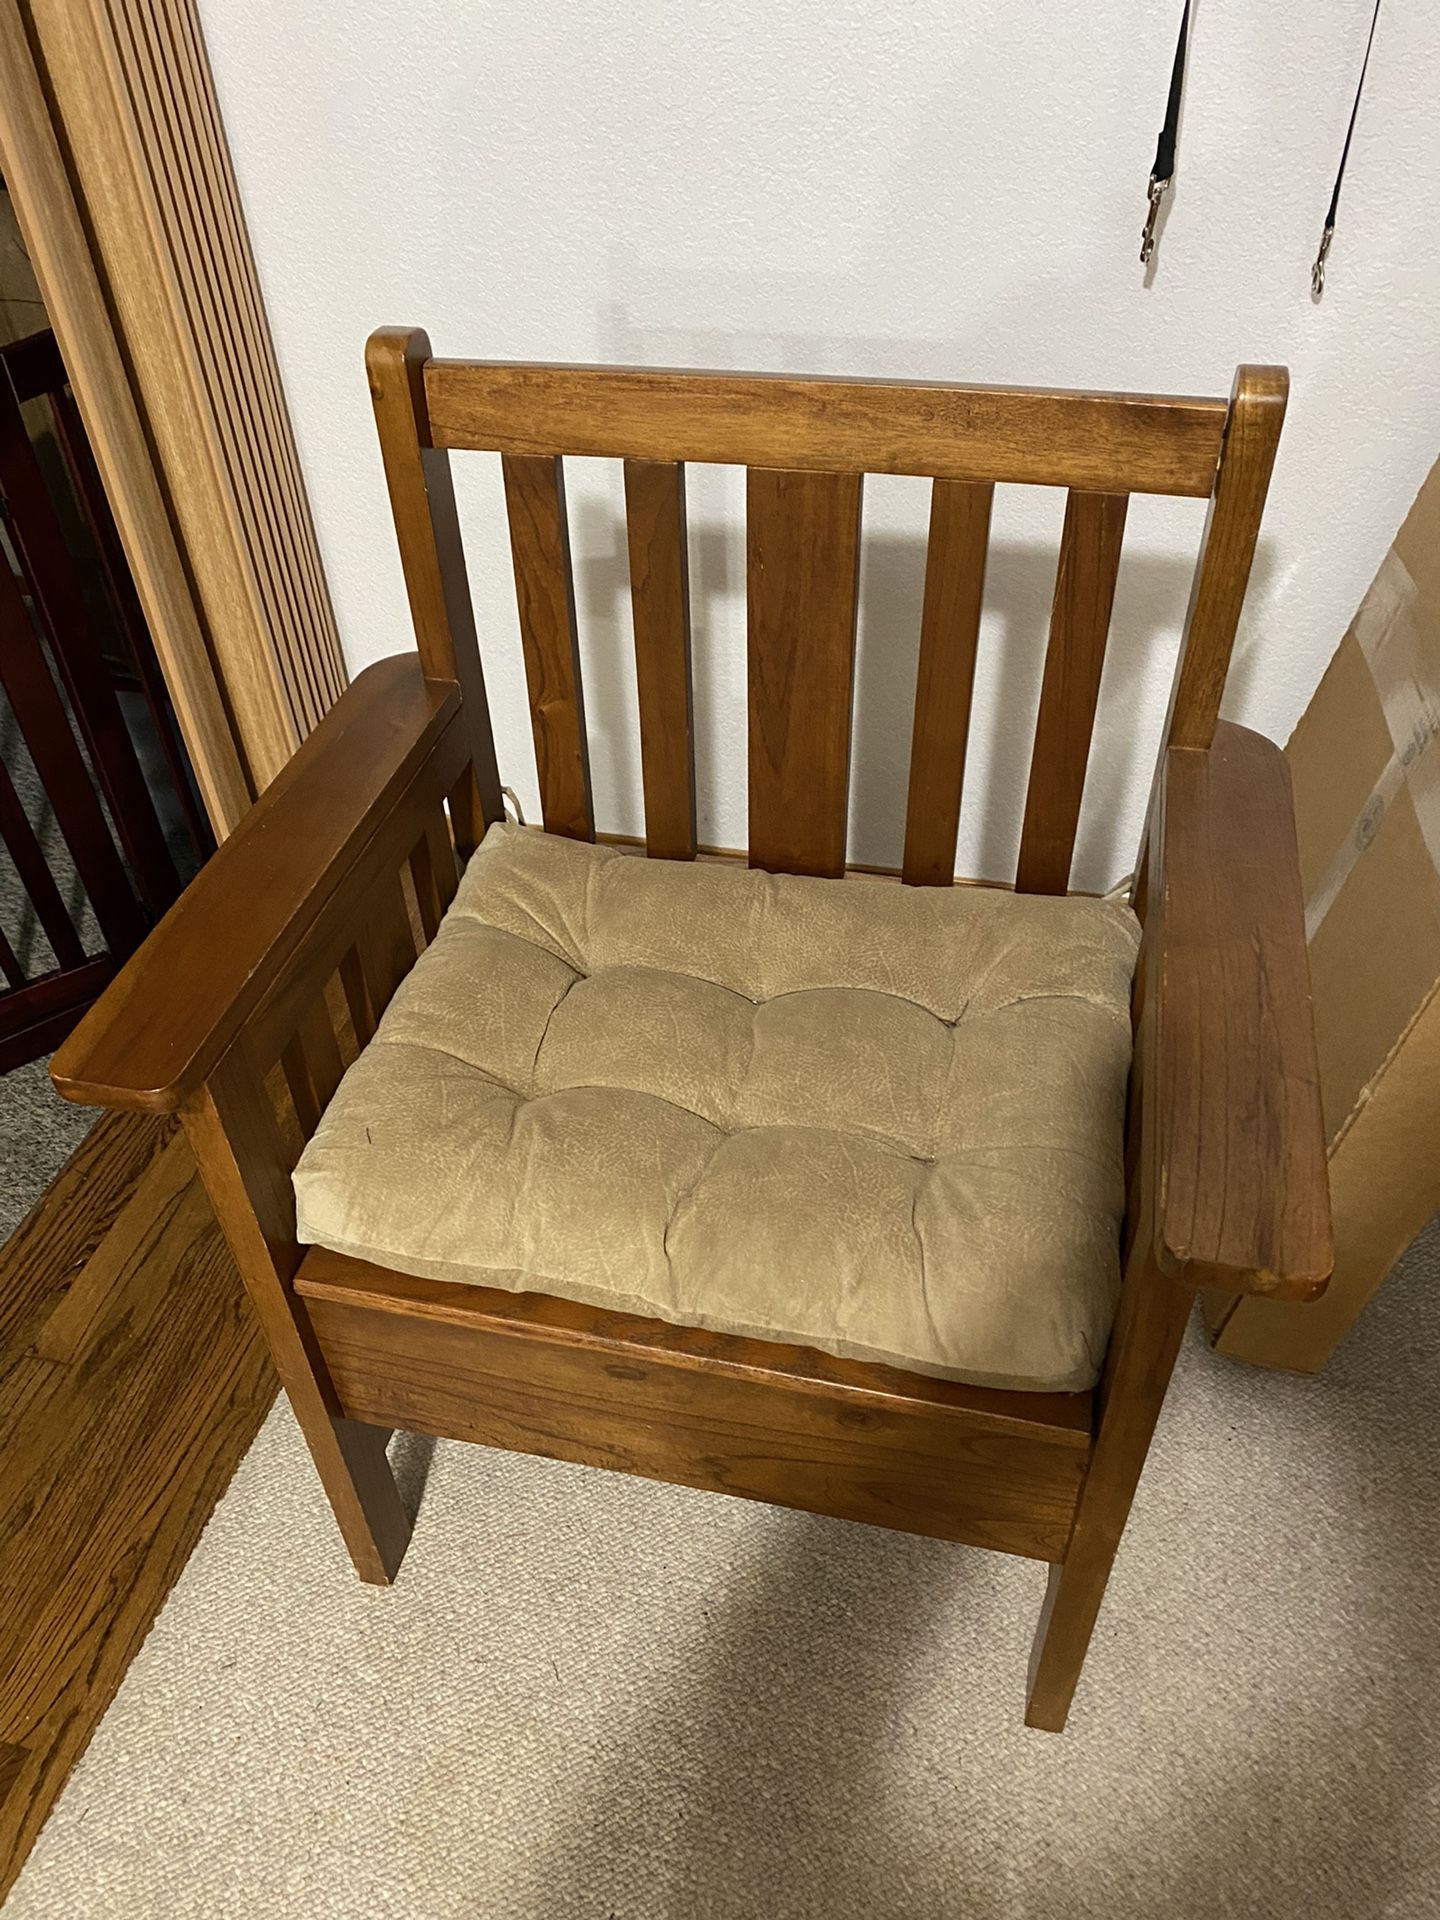 Antique Entryway Chair With Storage